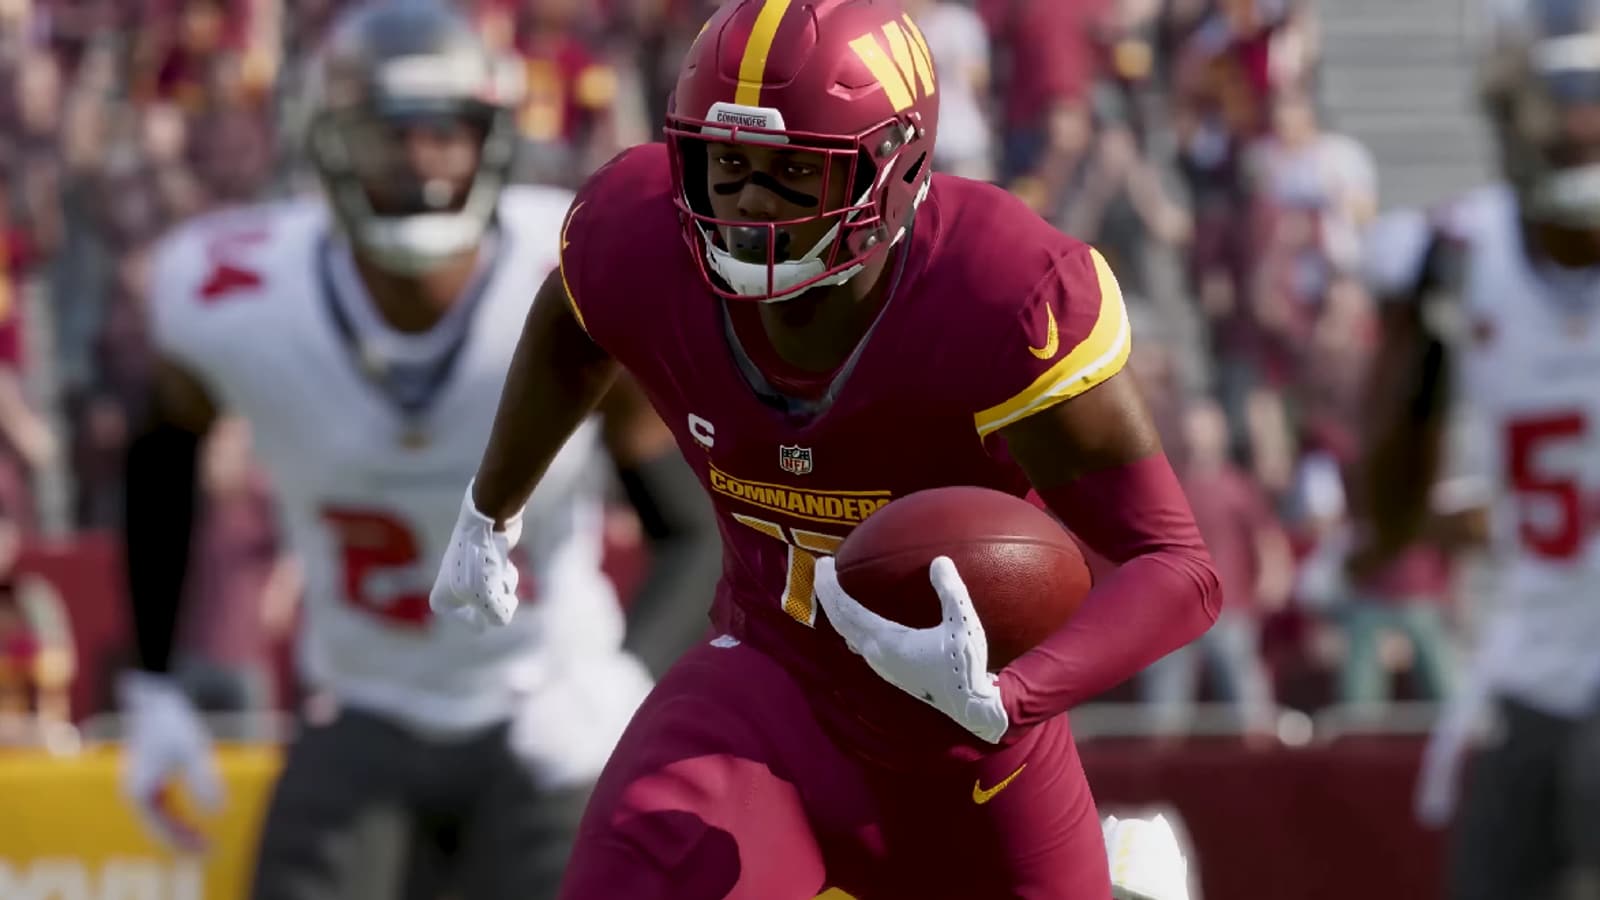 Madden 23 review: A franchise in freefall - Dexerto